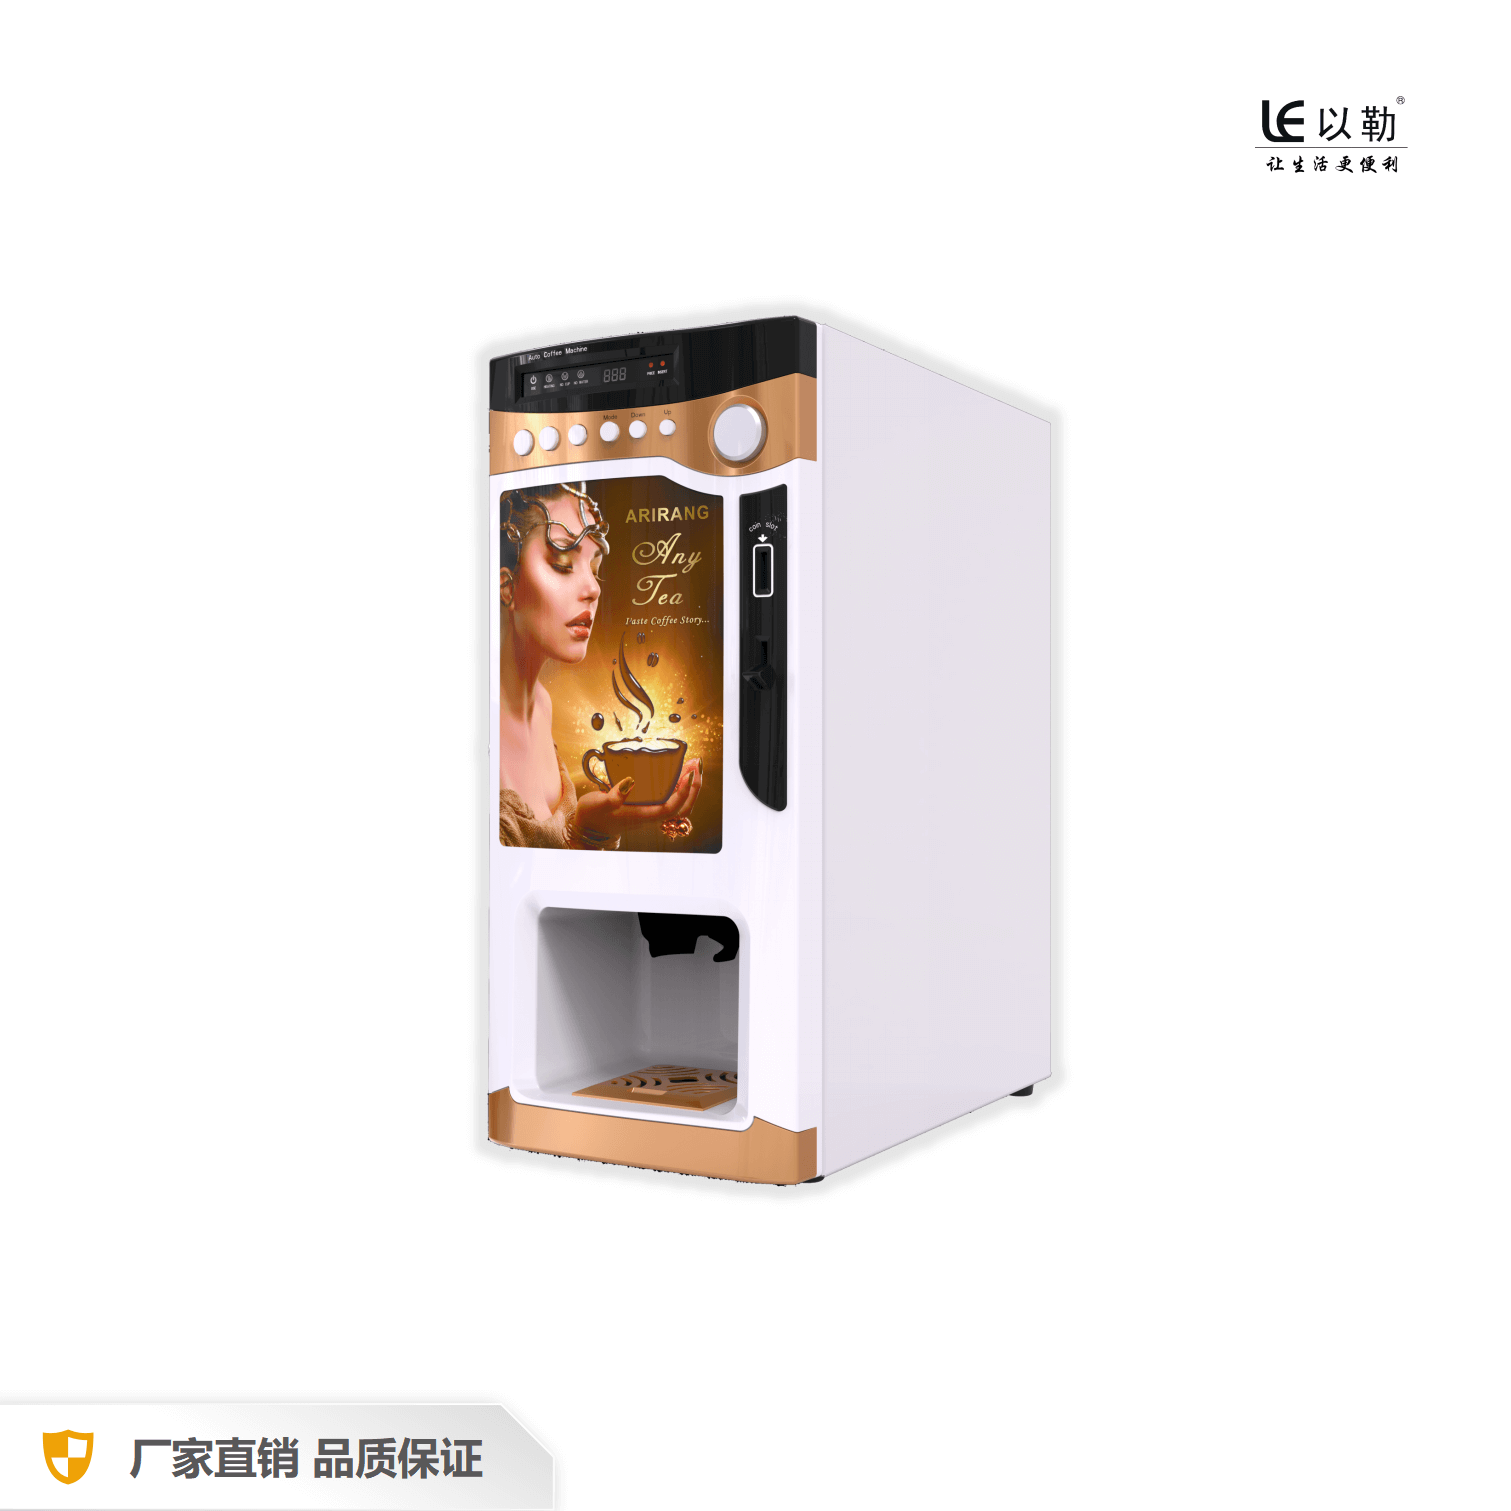 Convient Instant Coffee Vending Machine With Cup Dispenser